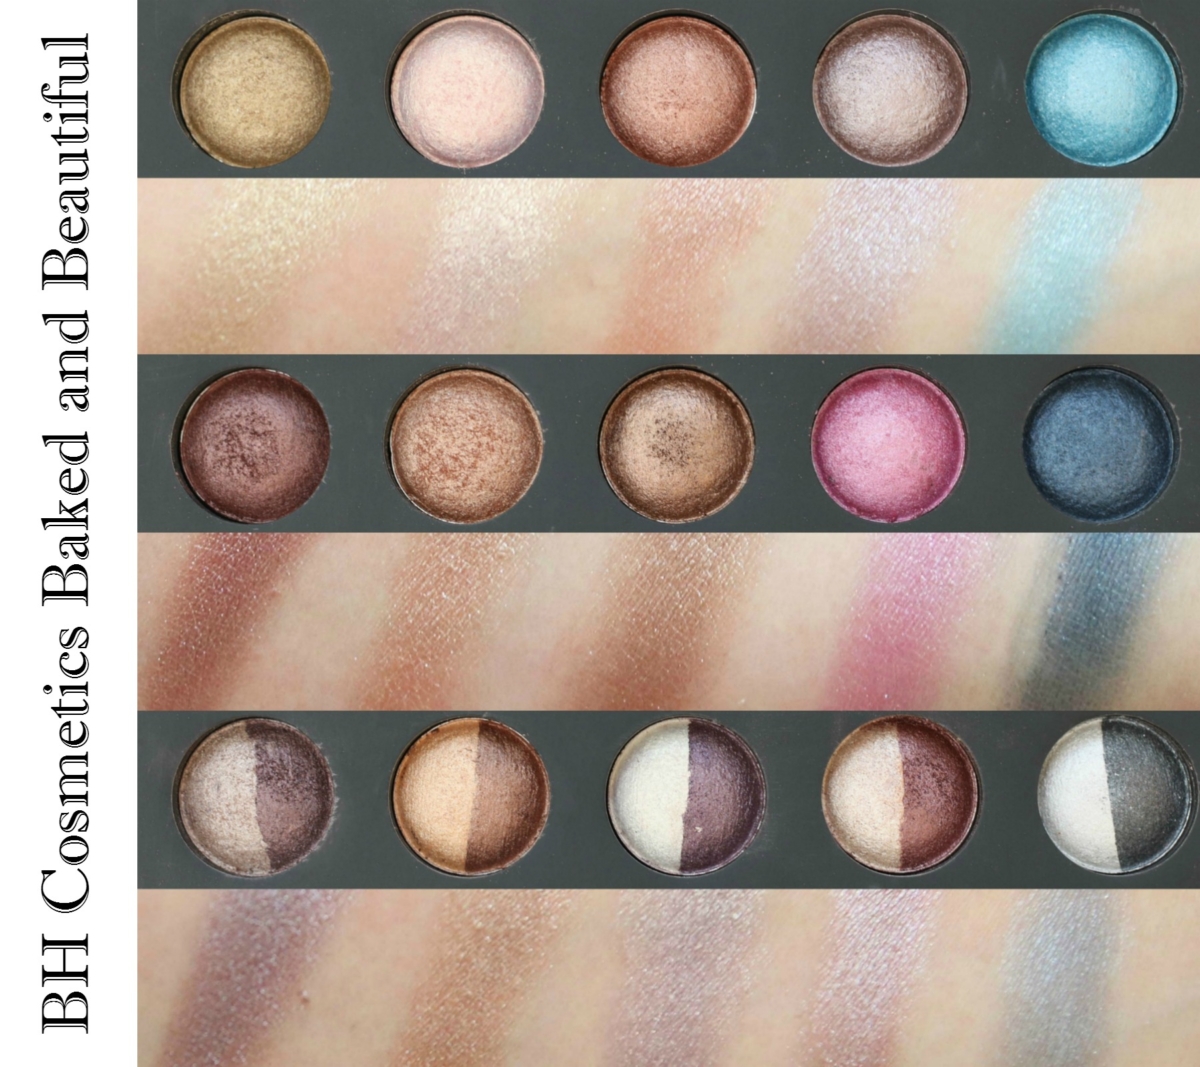 BH Cosmetics Baked and Beautiful Eyeshadow Palette Review and Swatches